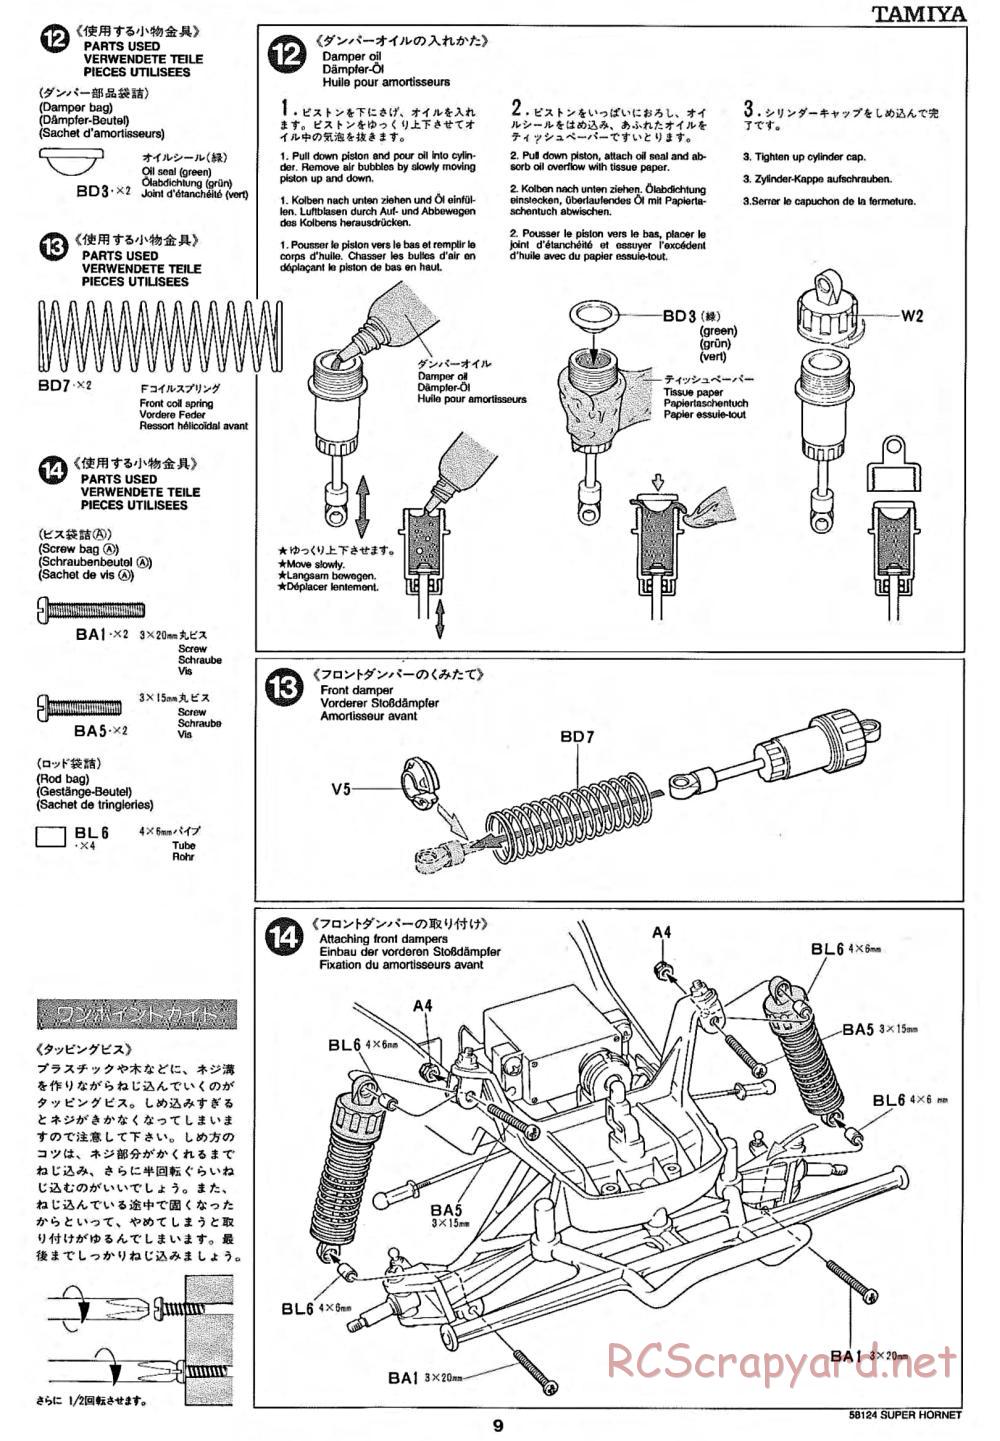 Tamiya - Super Hornet Chassis - Manual - Page 9